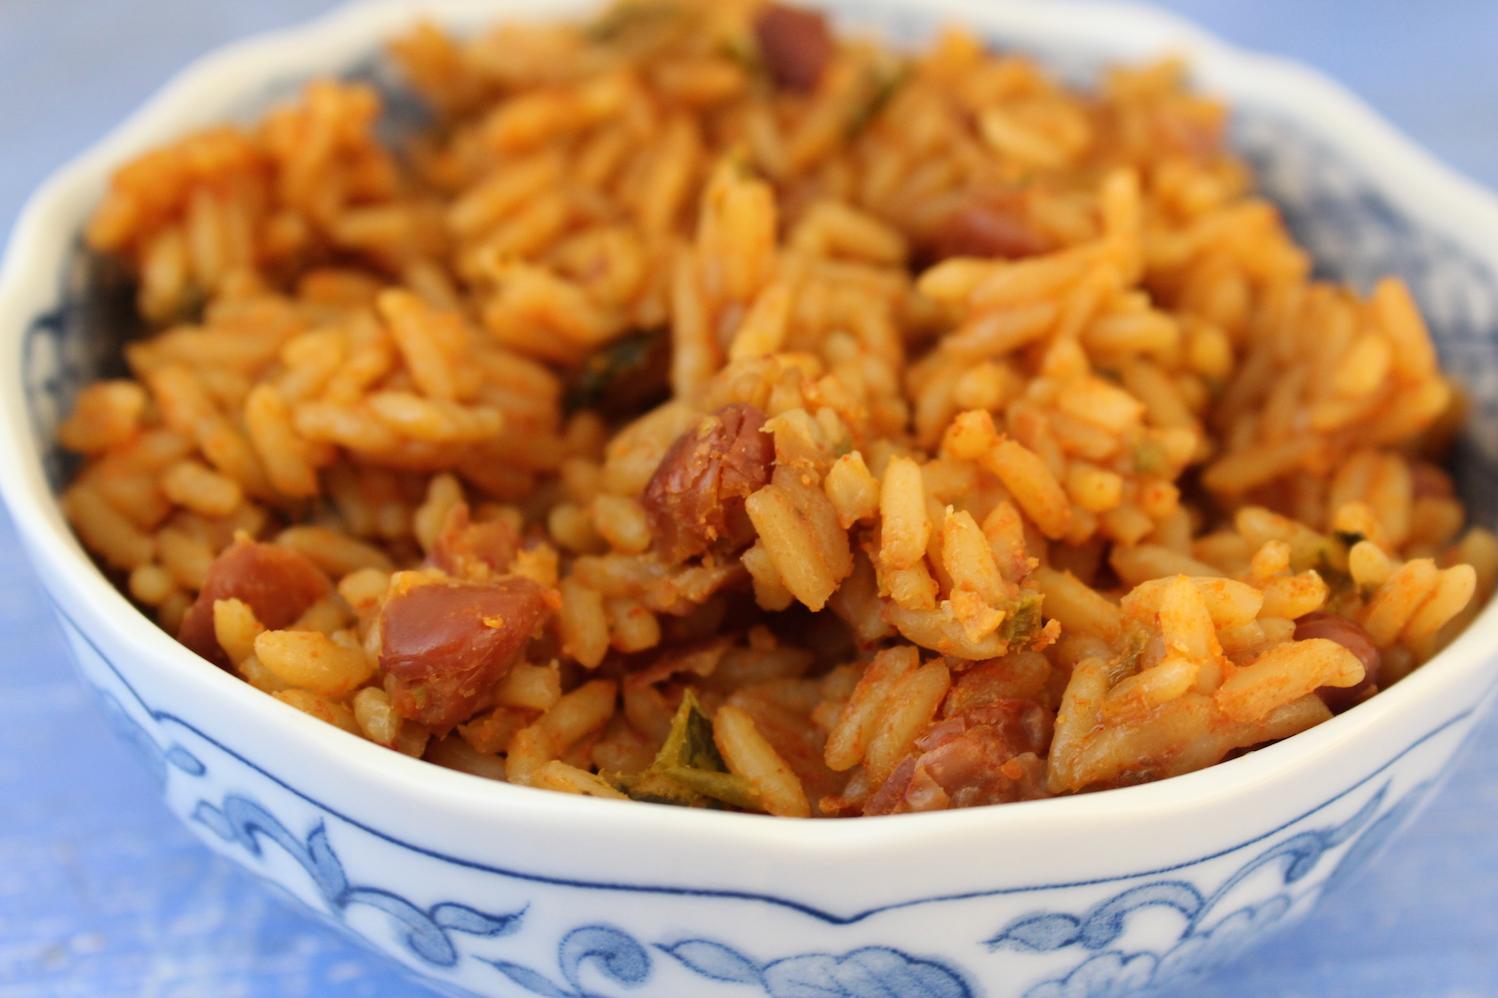  A colorful plate of Puerto Rican rice and beans will take your taste buds on a tropical vacation!